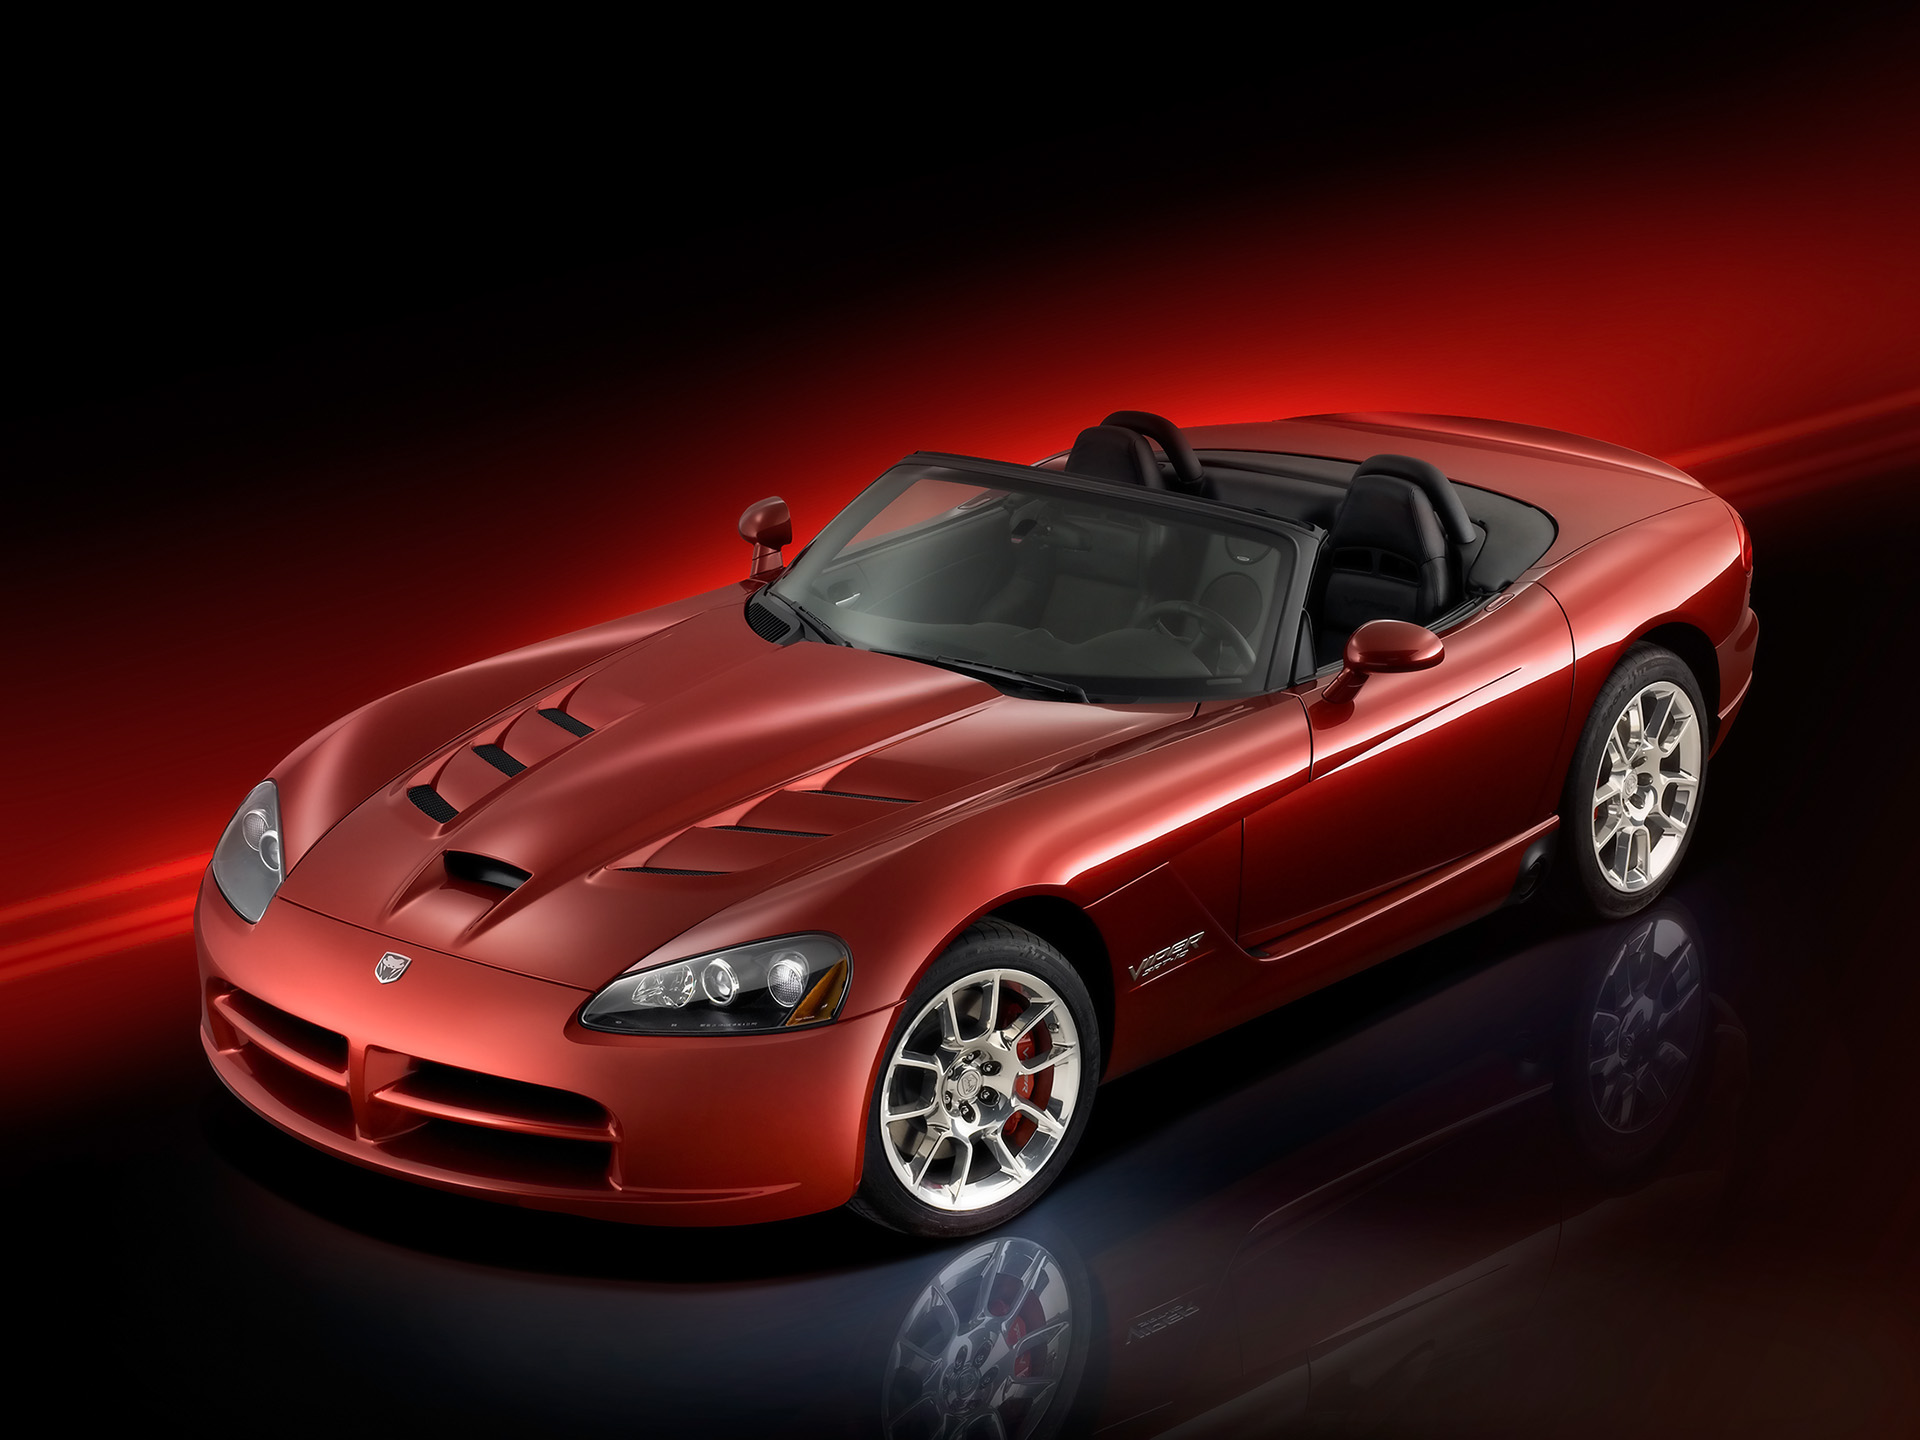 2008 Dodge Viper SRT10 - Roadster Front And Side Red - 1920x1440 ...